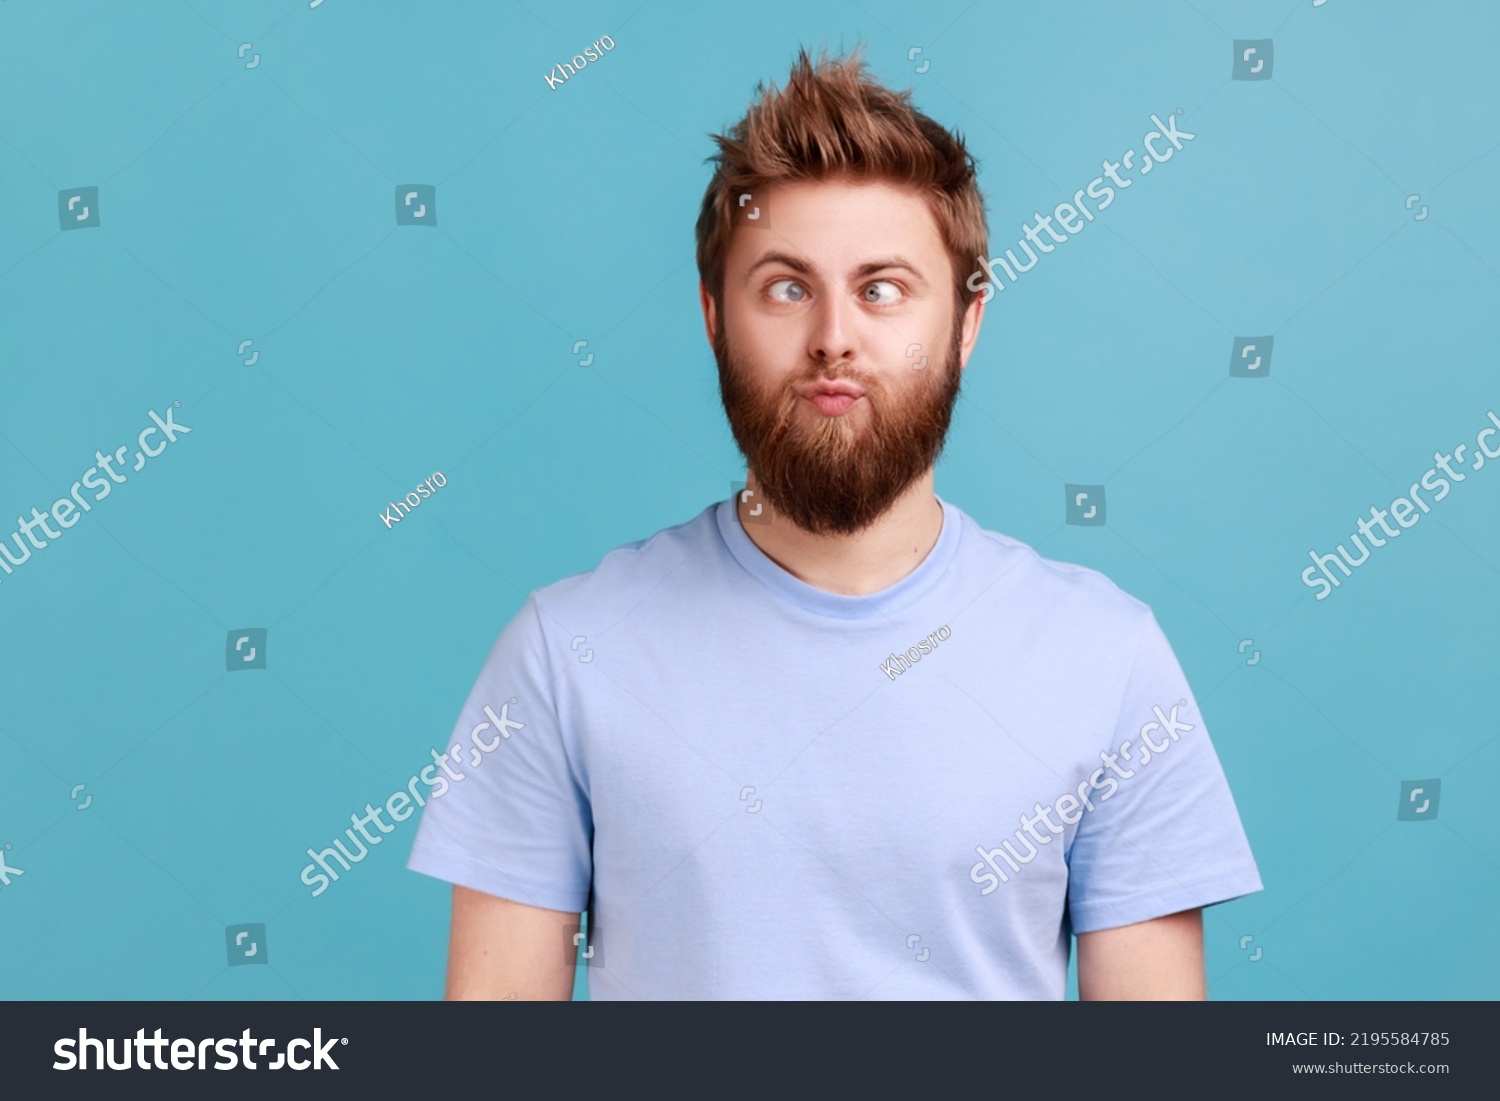 Portrait of man making silly humorous face with eyes crossed, showing comical silly brainless facial expression posing with stupid smile, fooling around. Indoor studio shot isolated on blue background #2195584785